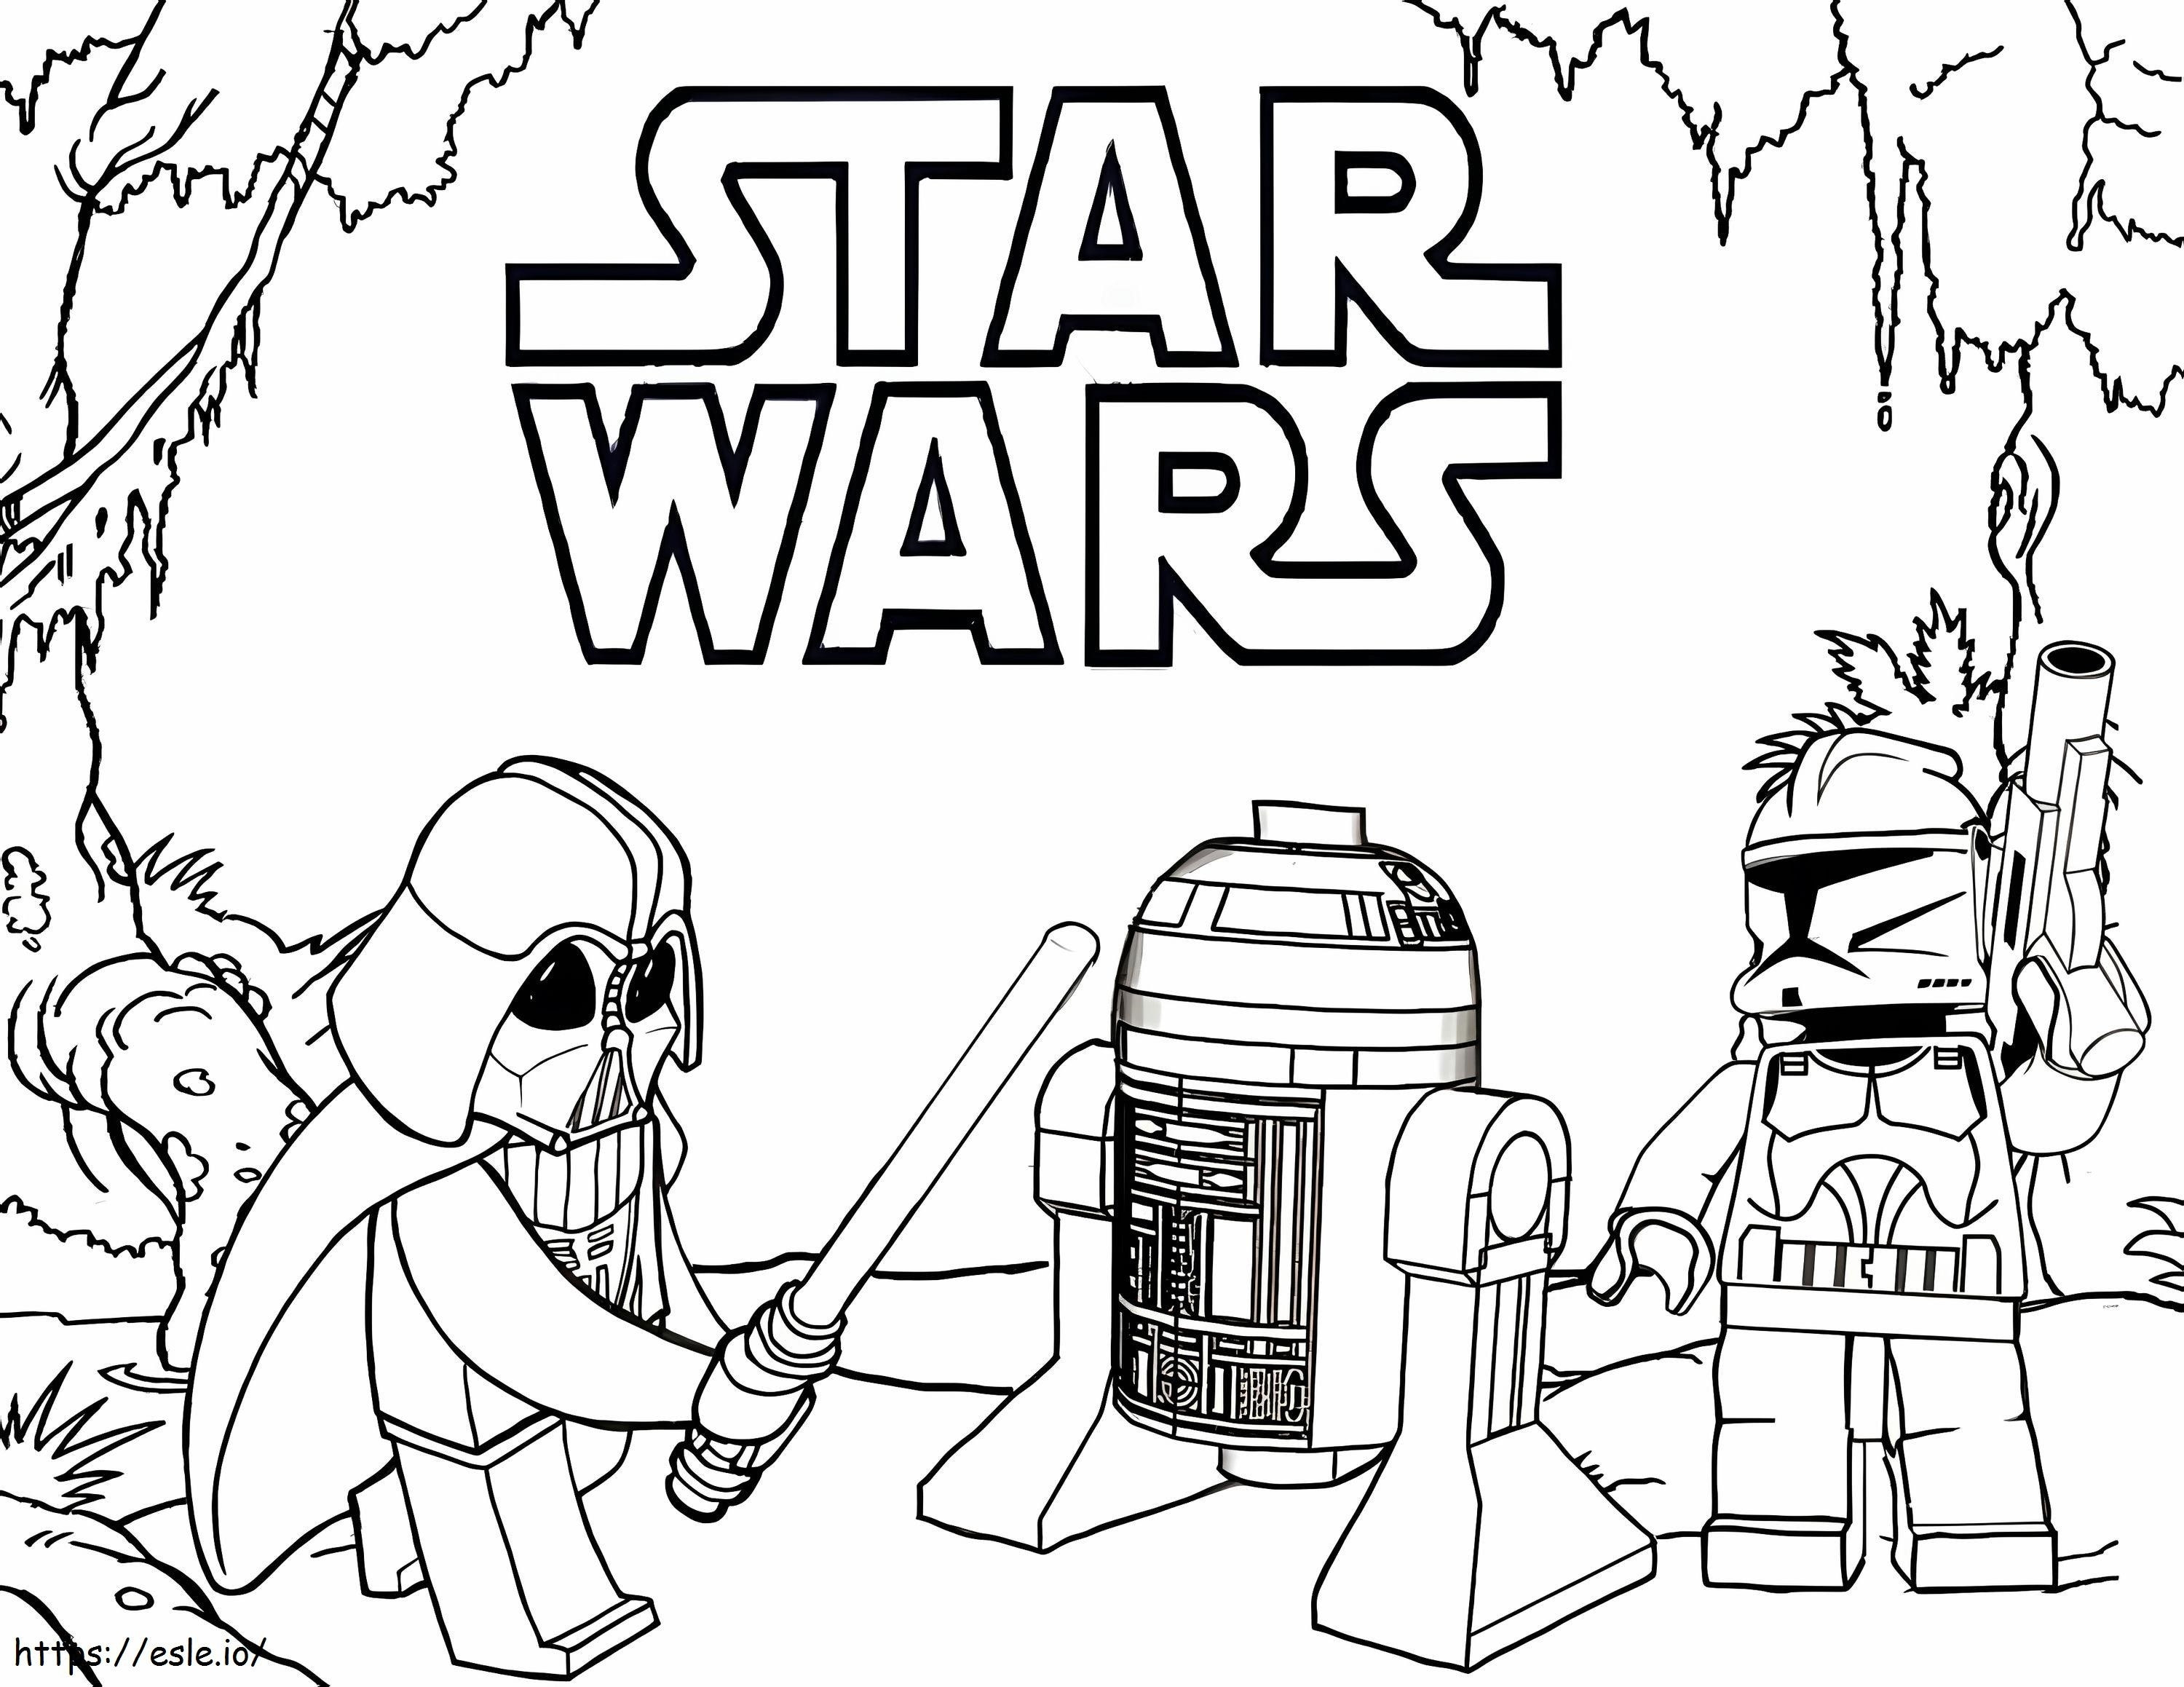 Lego Star Wars 3 coloring page